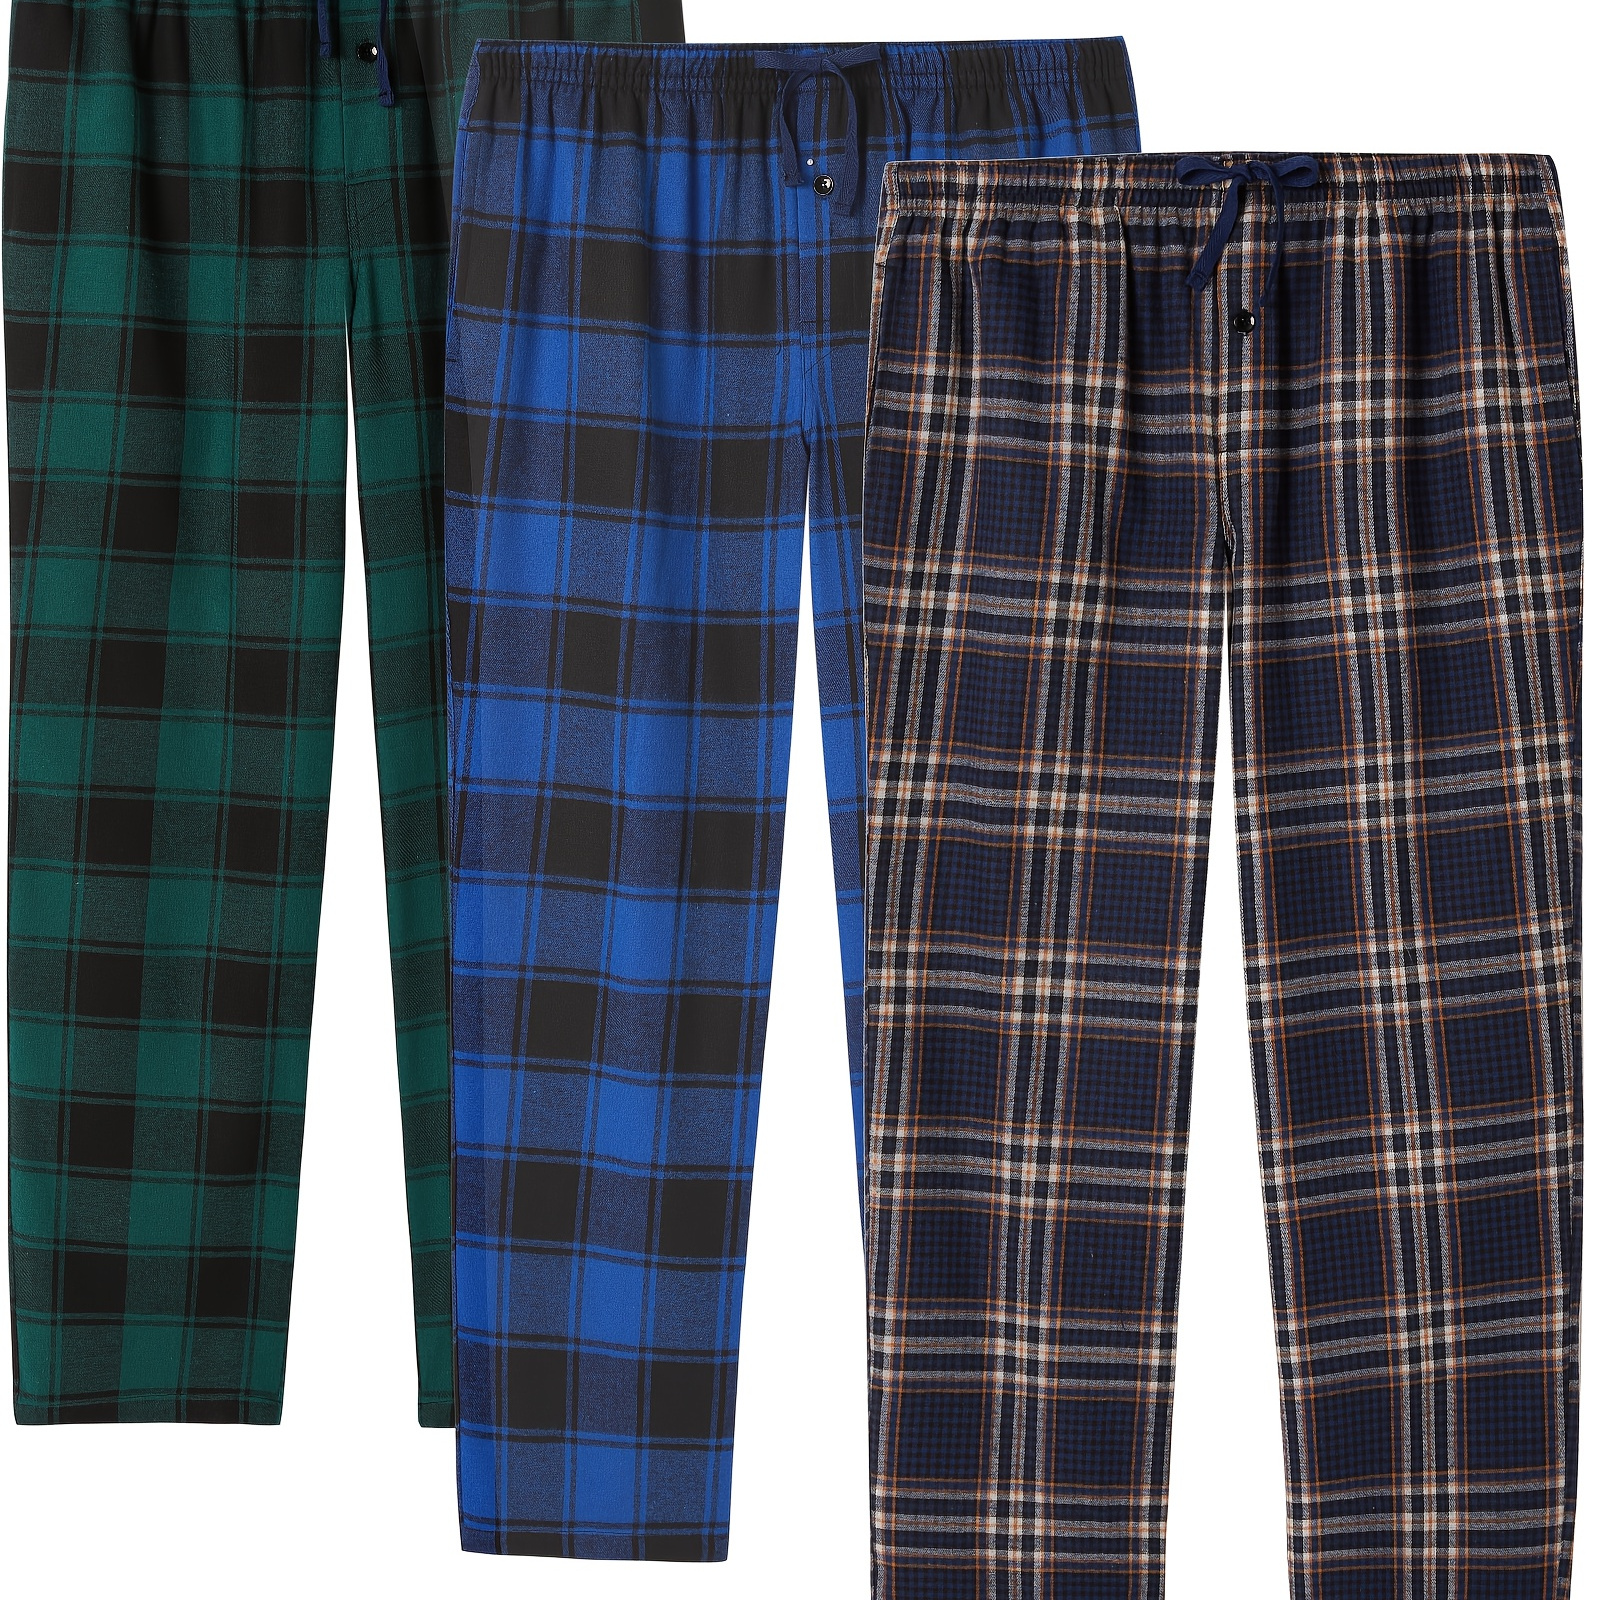 

3 Pcs Plus Size Men's Flannel Plaid Long Sleep & Lounge Pants, Pajama Bottoms With Pockets And Drawstring For Daily Wear